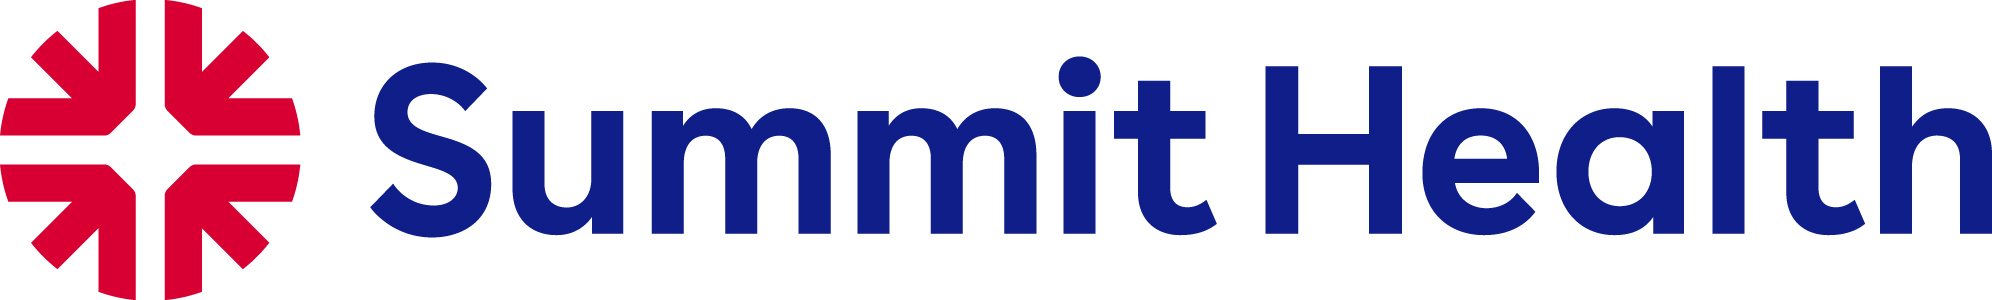 Summit Health and CityMD Unveil New Logo Designs, Distinctively Connecting Primary, Specialty, and Urgent Care | Business Wire